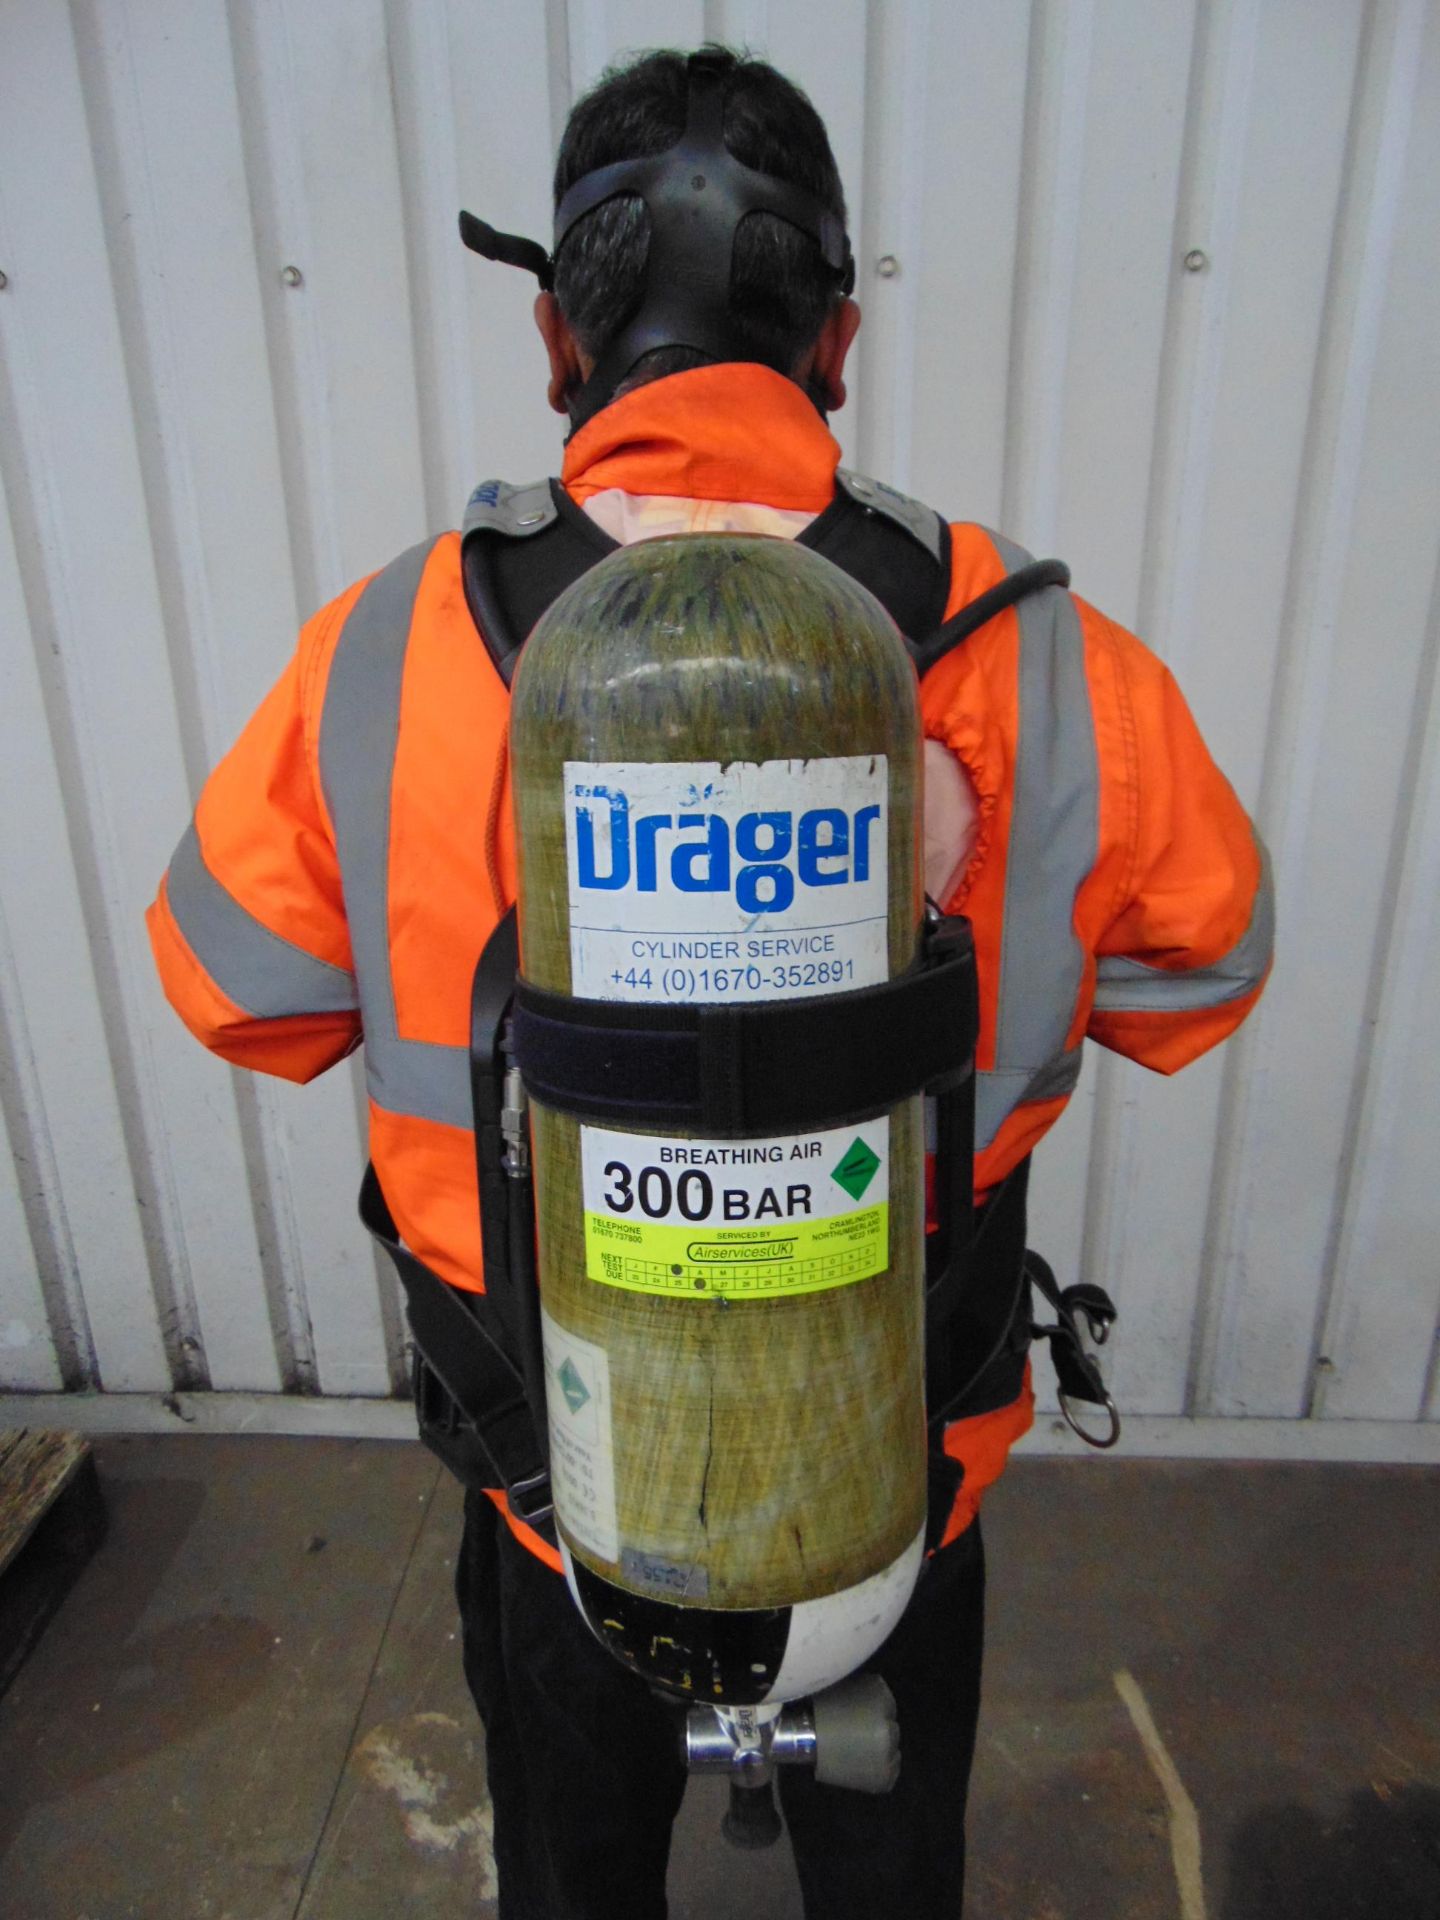 5 x Drager PSS 7000 Self Contained Breathing Apparatus w/ 10 x Drager 300 Bar Air Cylinders - Image 20 of 21